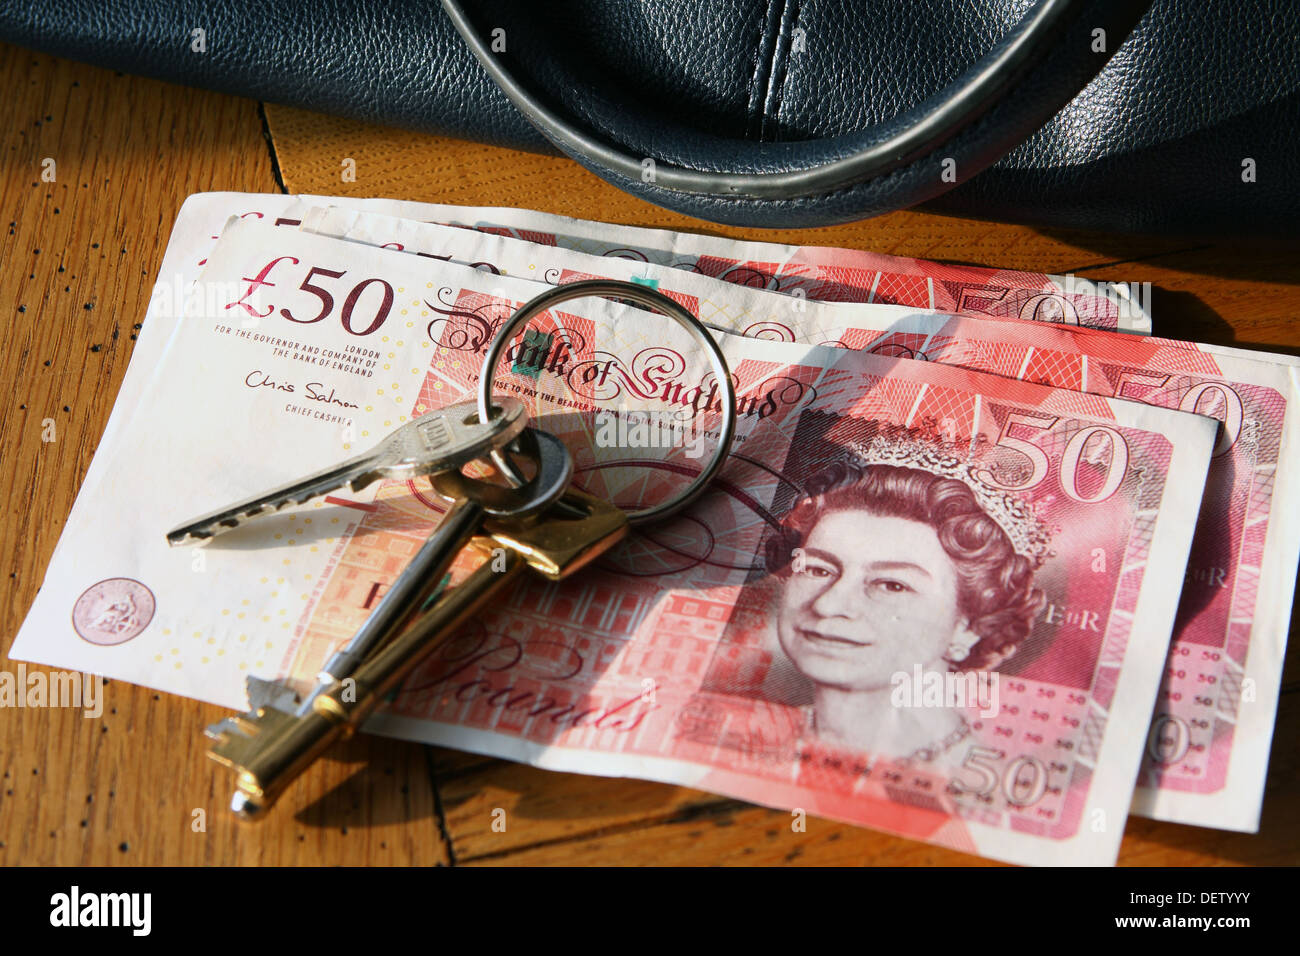 A bunch of keys on sterling £50 notes next to a handbag Stock Photo